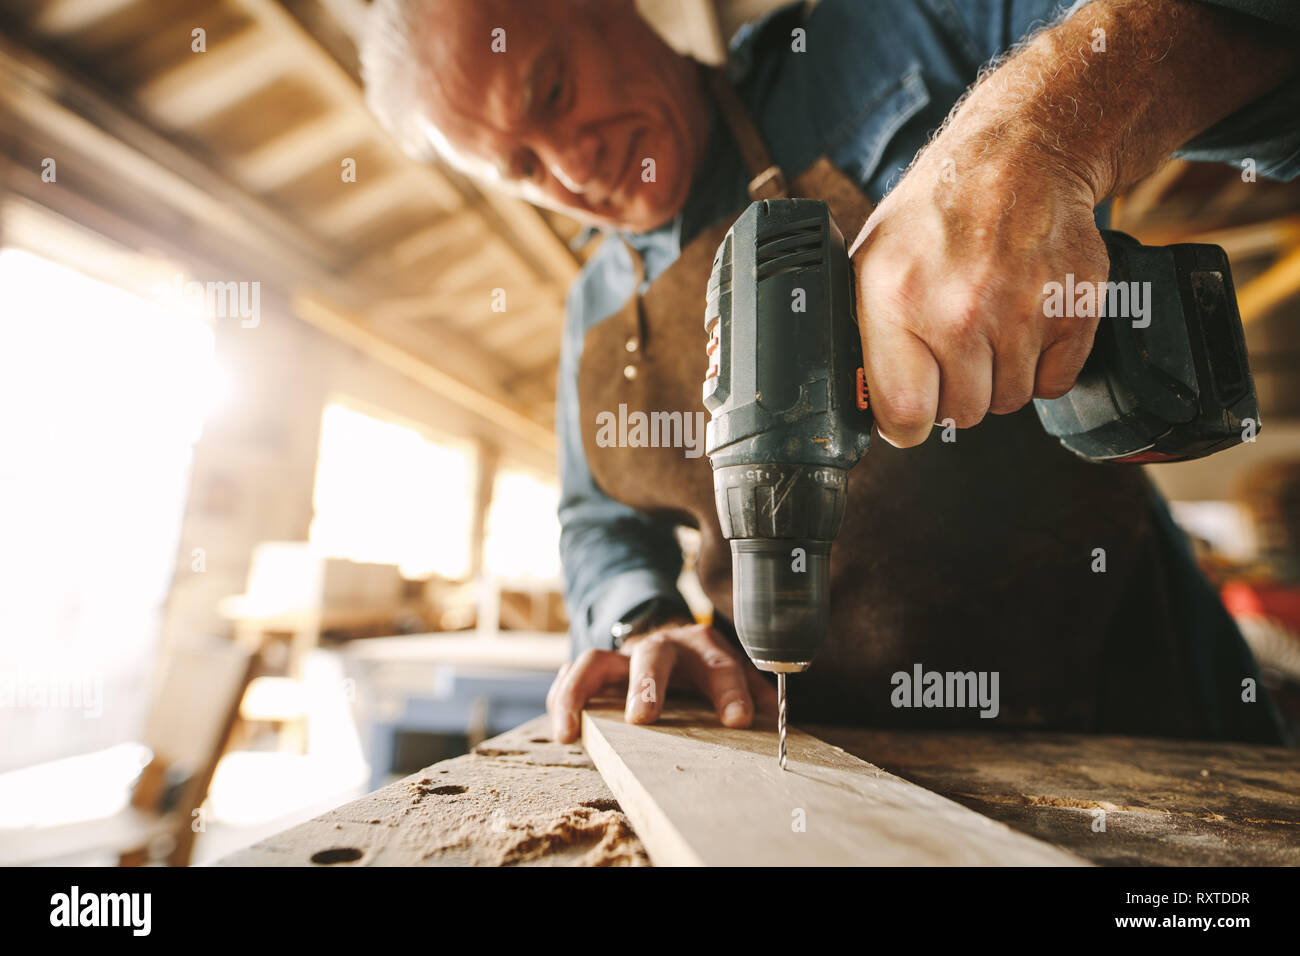 Senior male carpenter drilling a hole in wooden plank on workbench. Focus on carpenter hand preparing furniture. Stock Photo